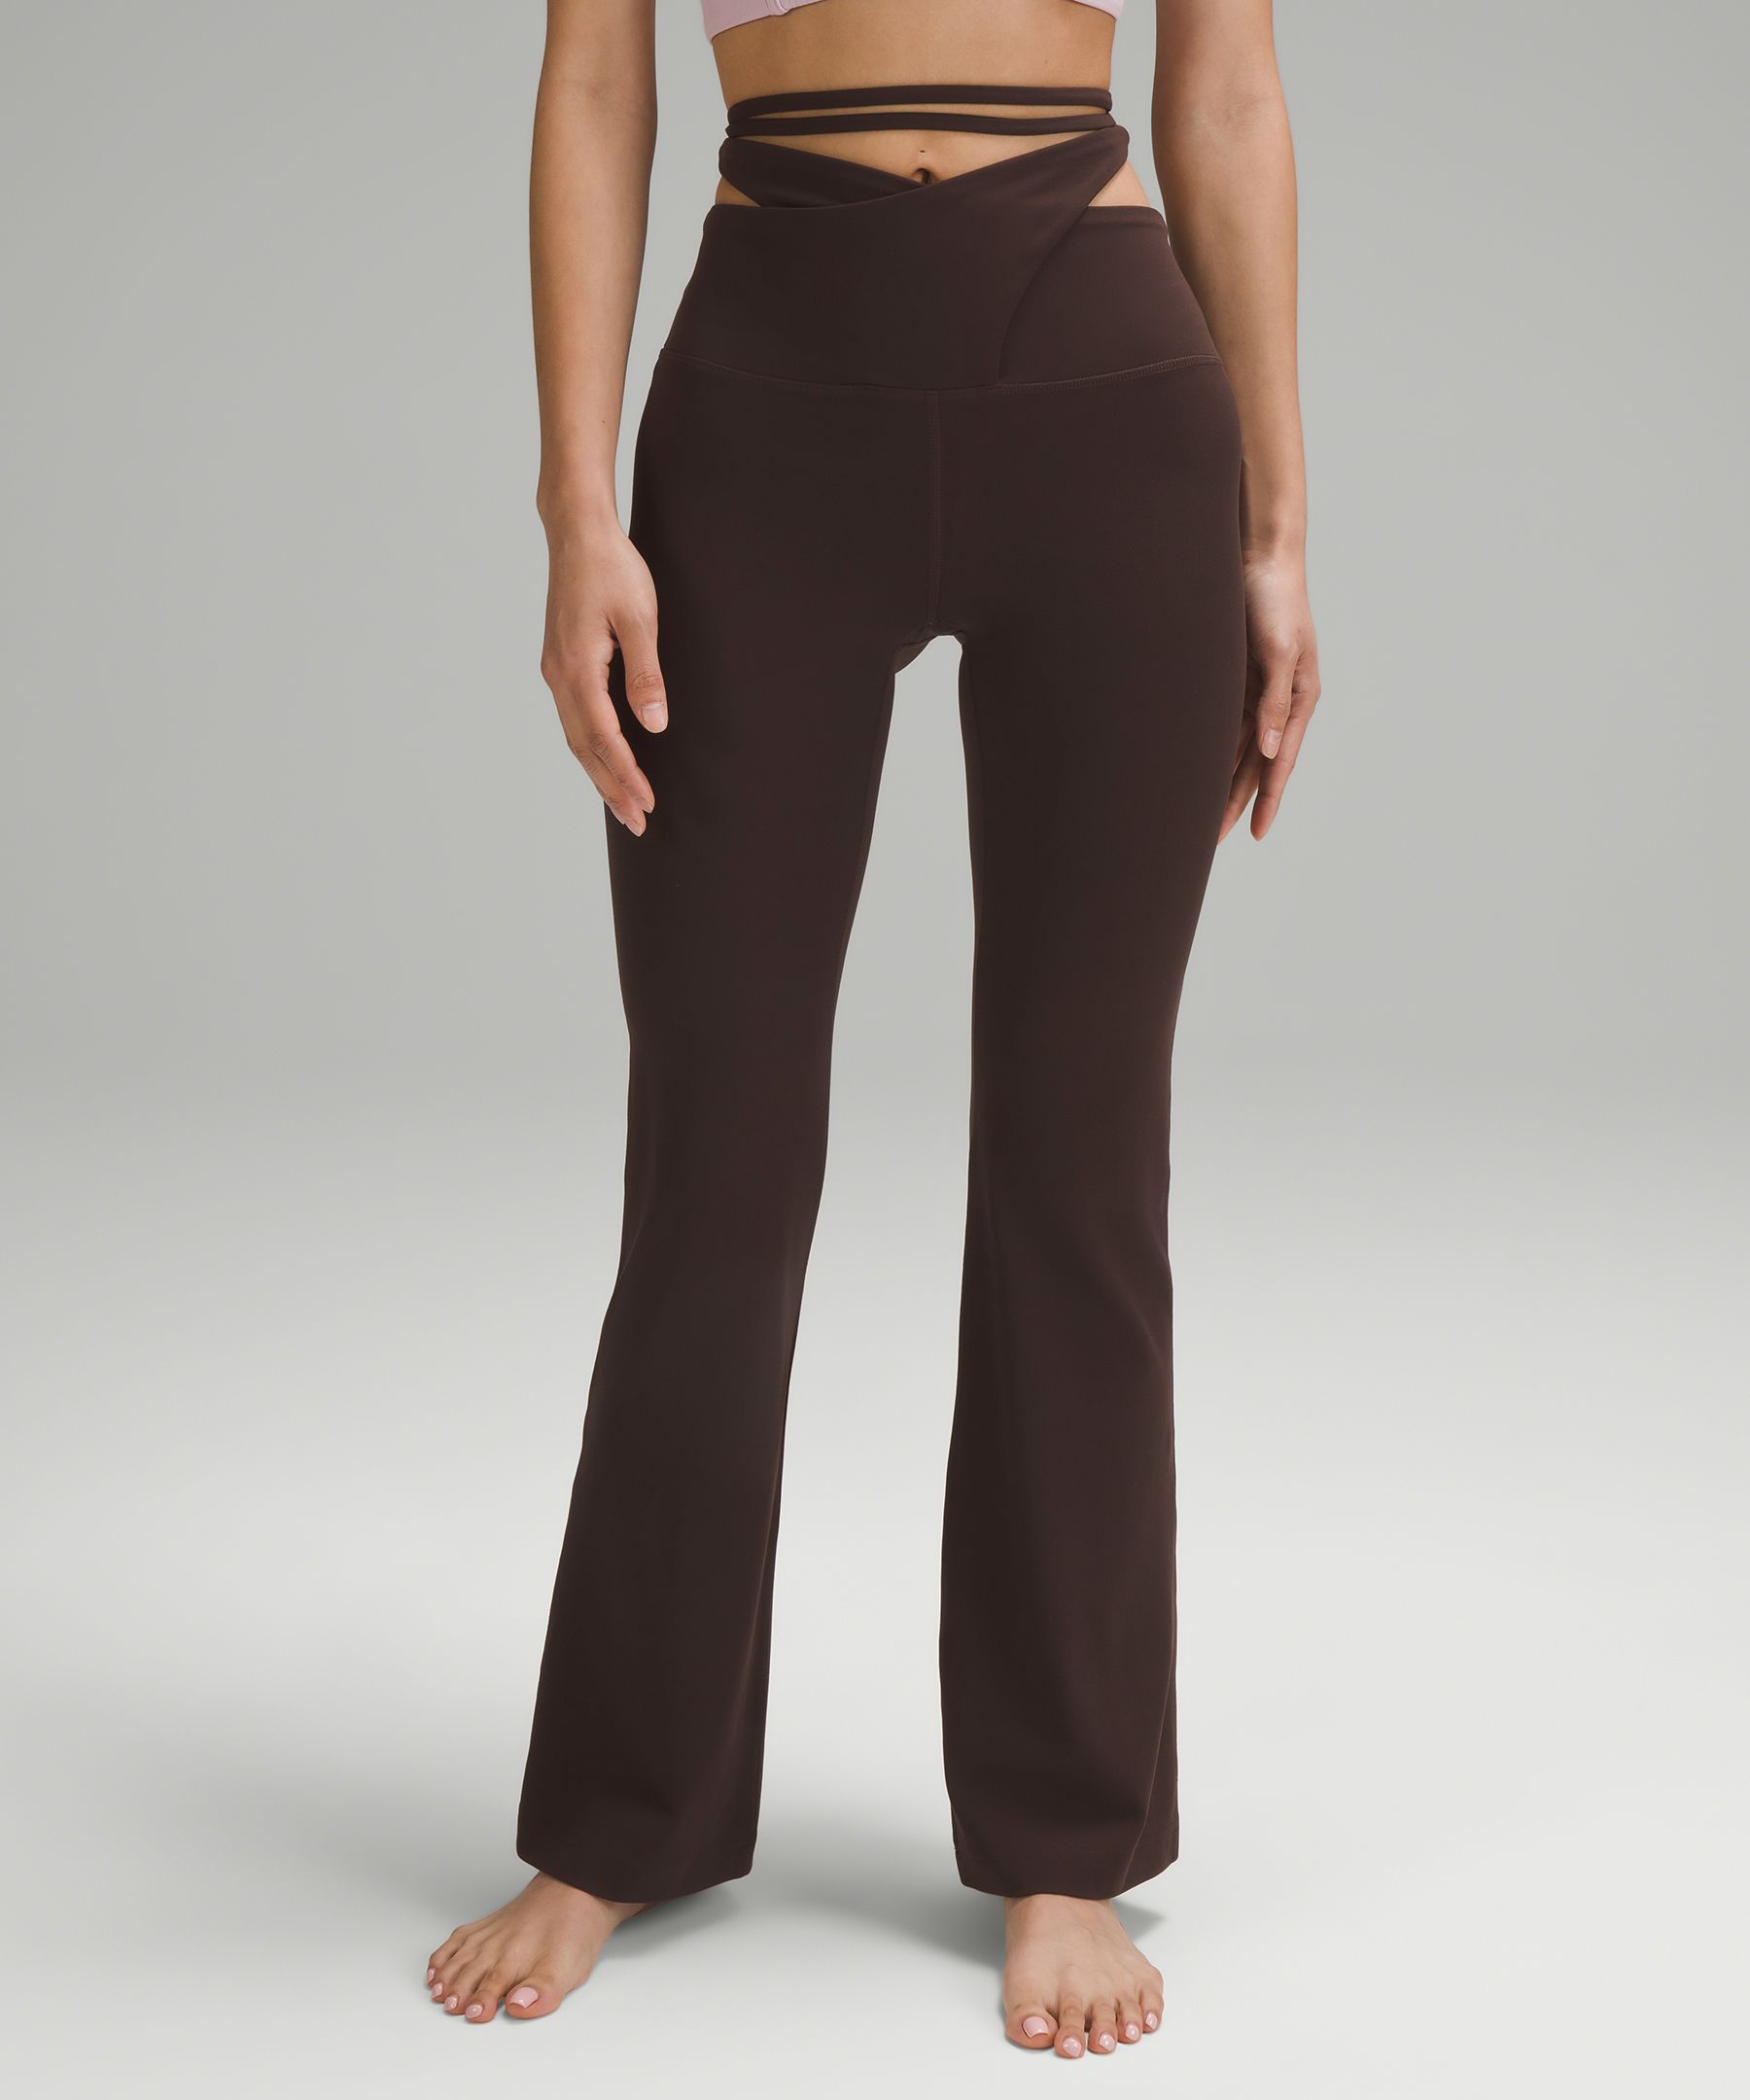 LULULEMON Groove Pant Flare Super High Rise Nulu 4 6 Smoky Red